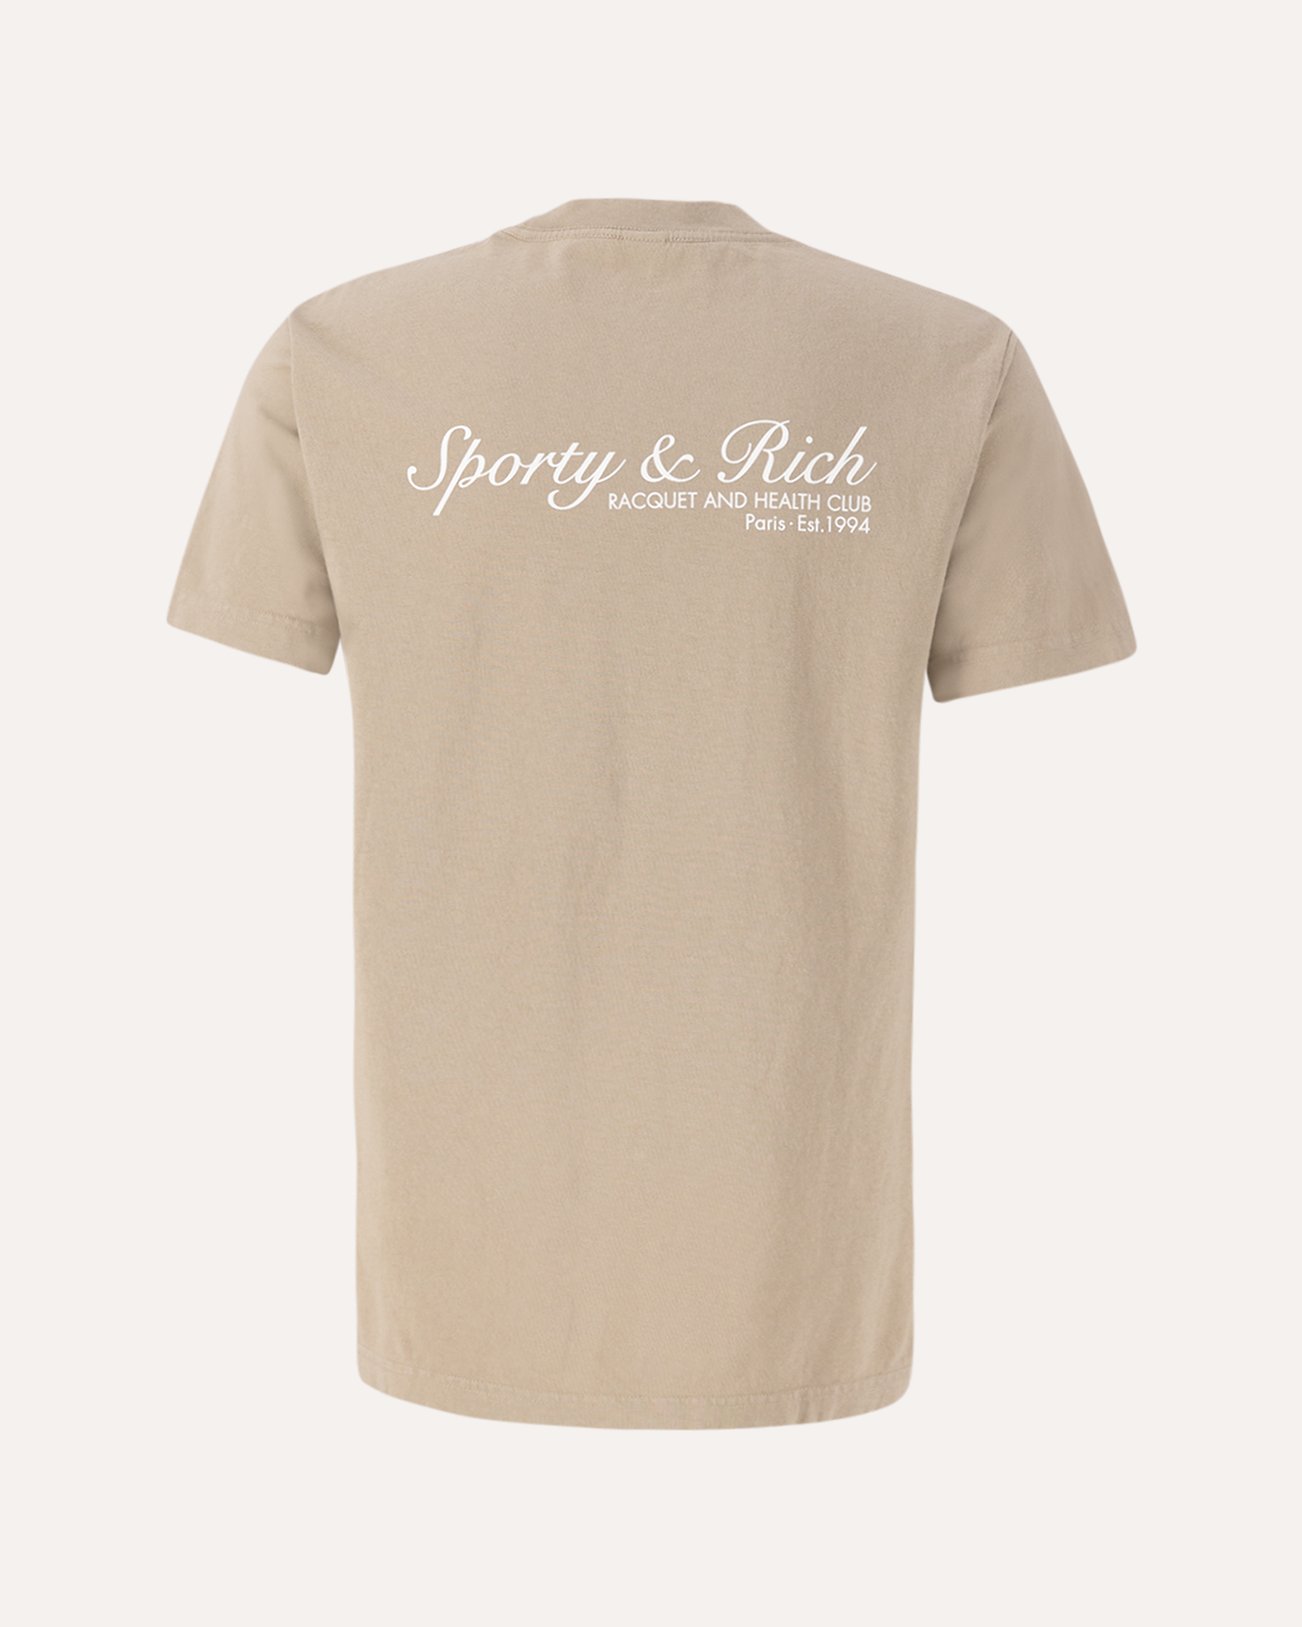 Sporty & Rich French Tee Shirt CREME 1